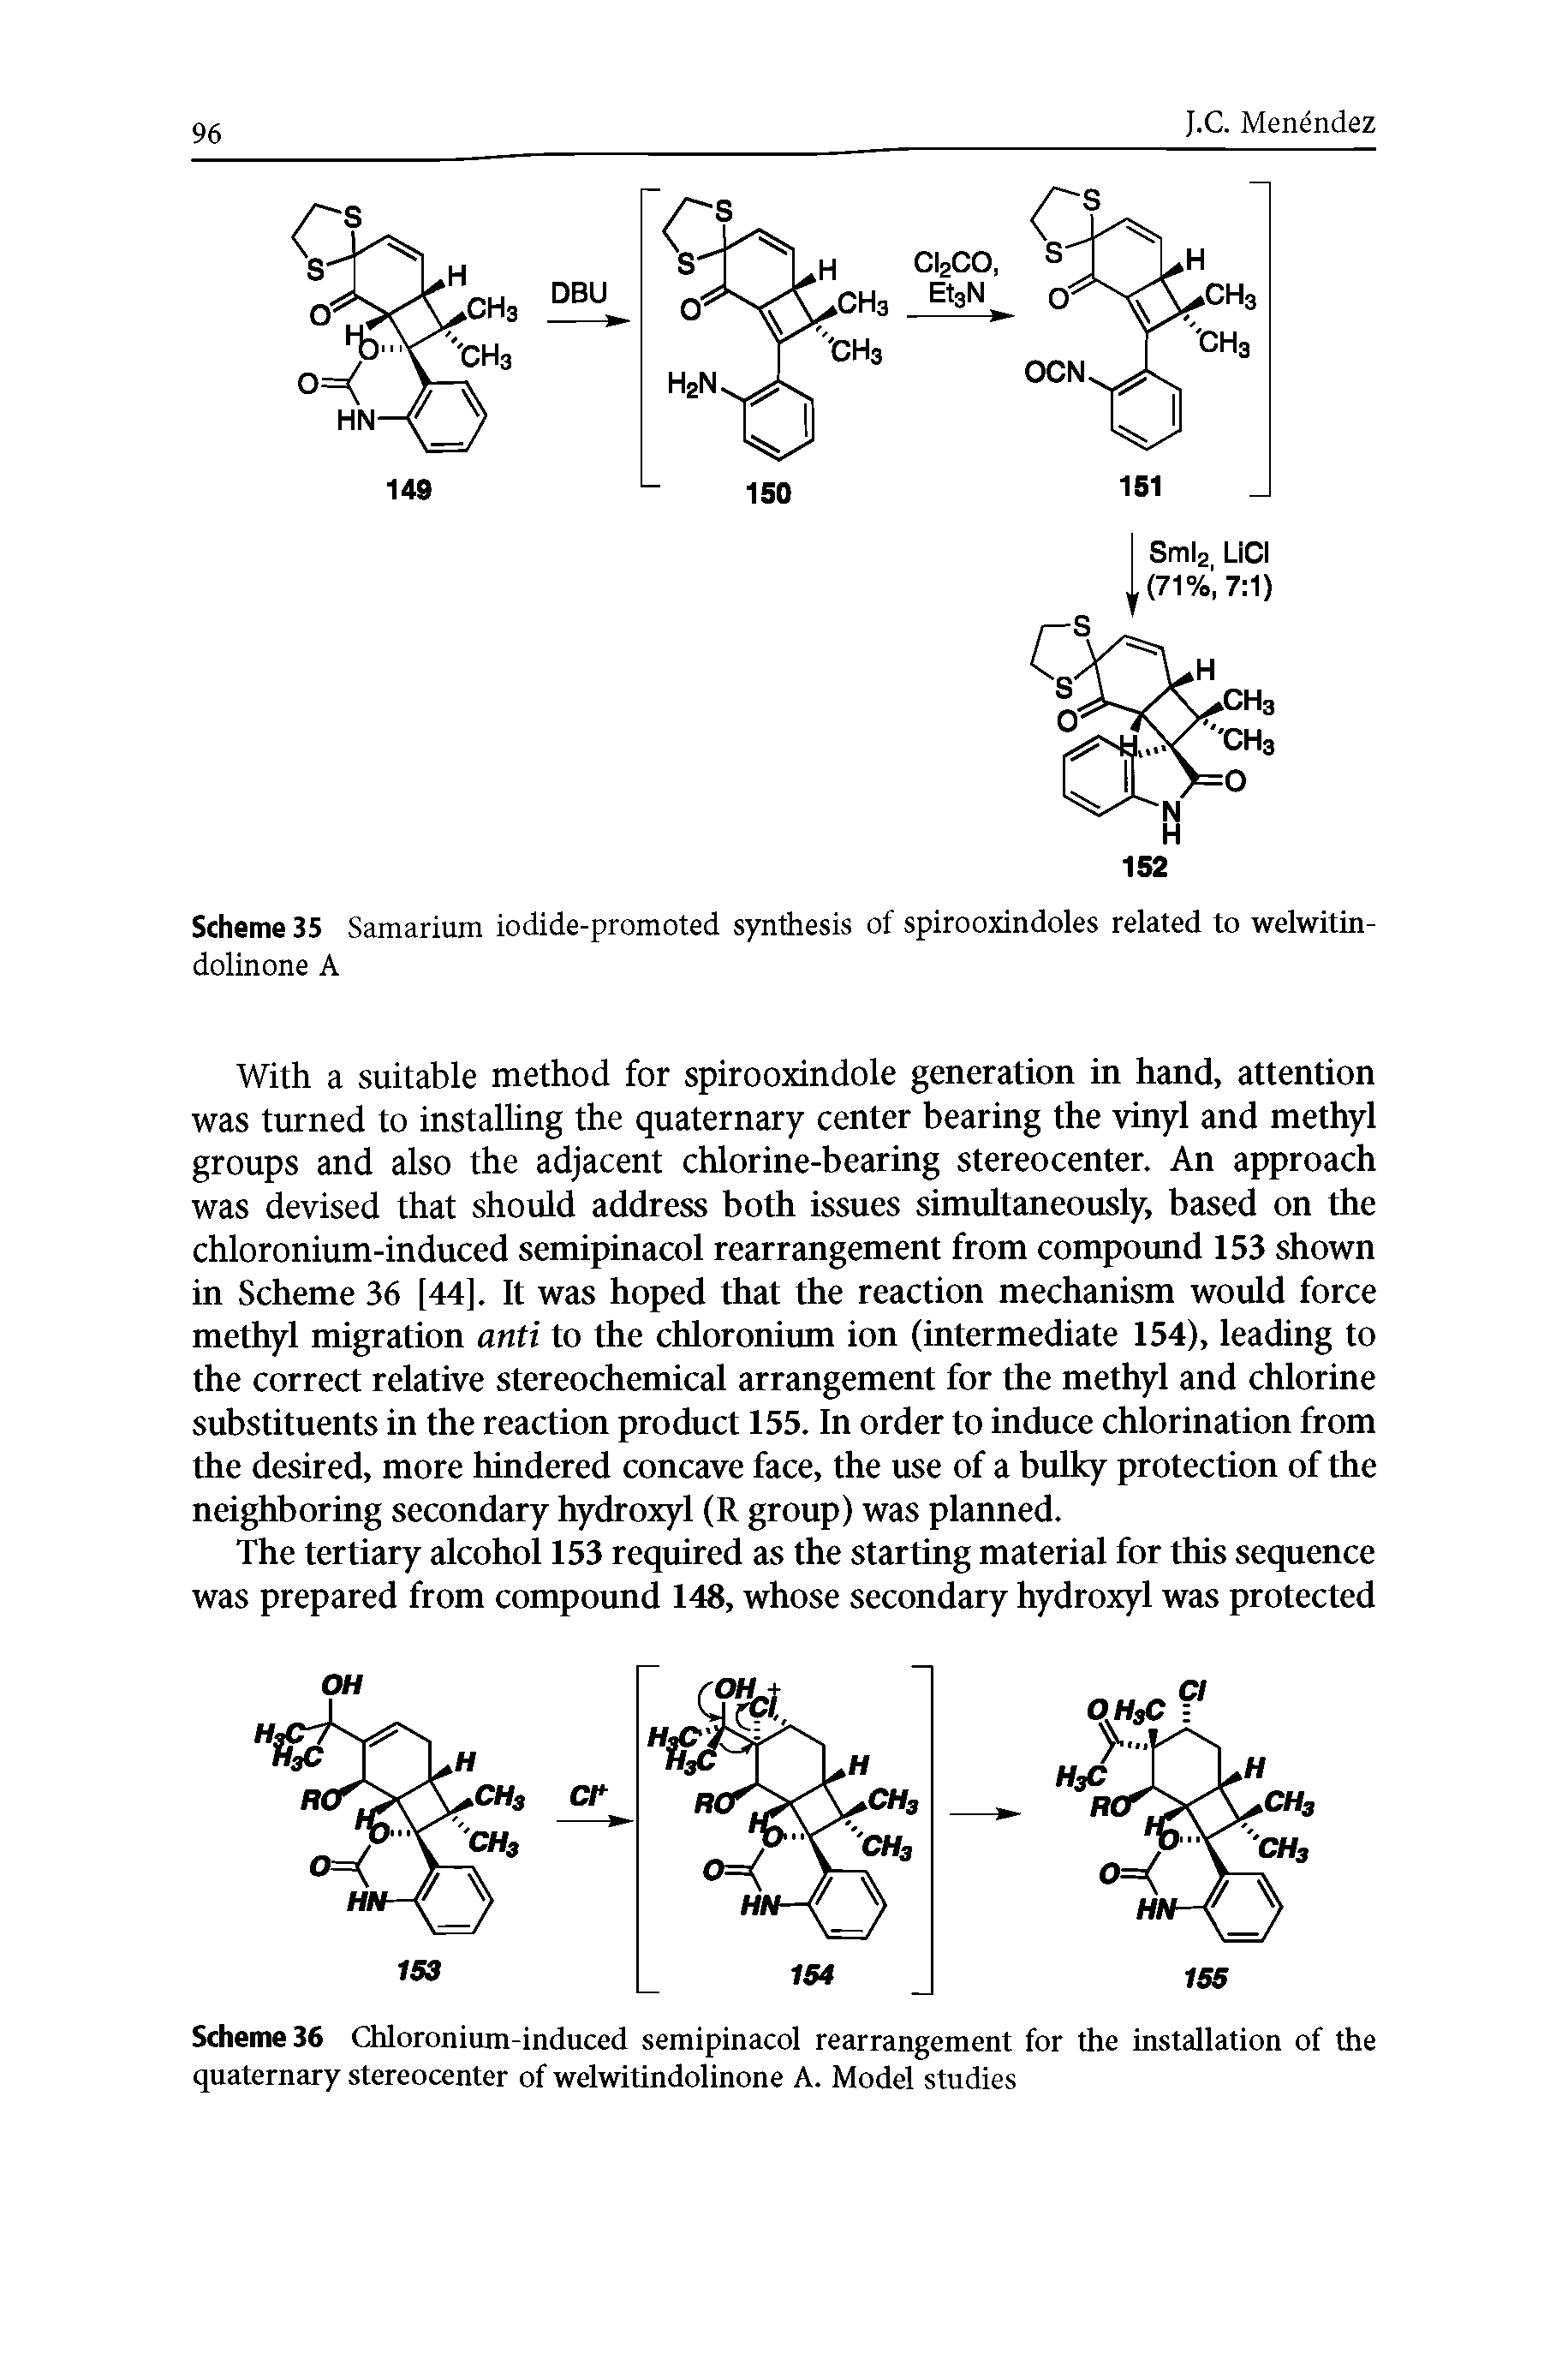 Scheme 36 Chloronium-induced semipinacol rearrangement for the installation of the quaternary stereocenter of welwitindolinone A. Model studies...